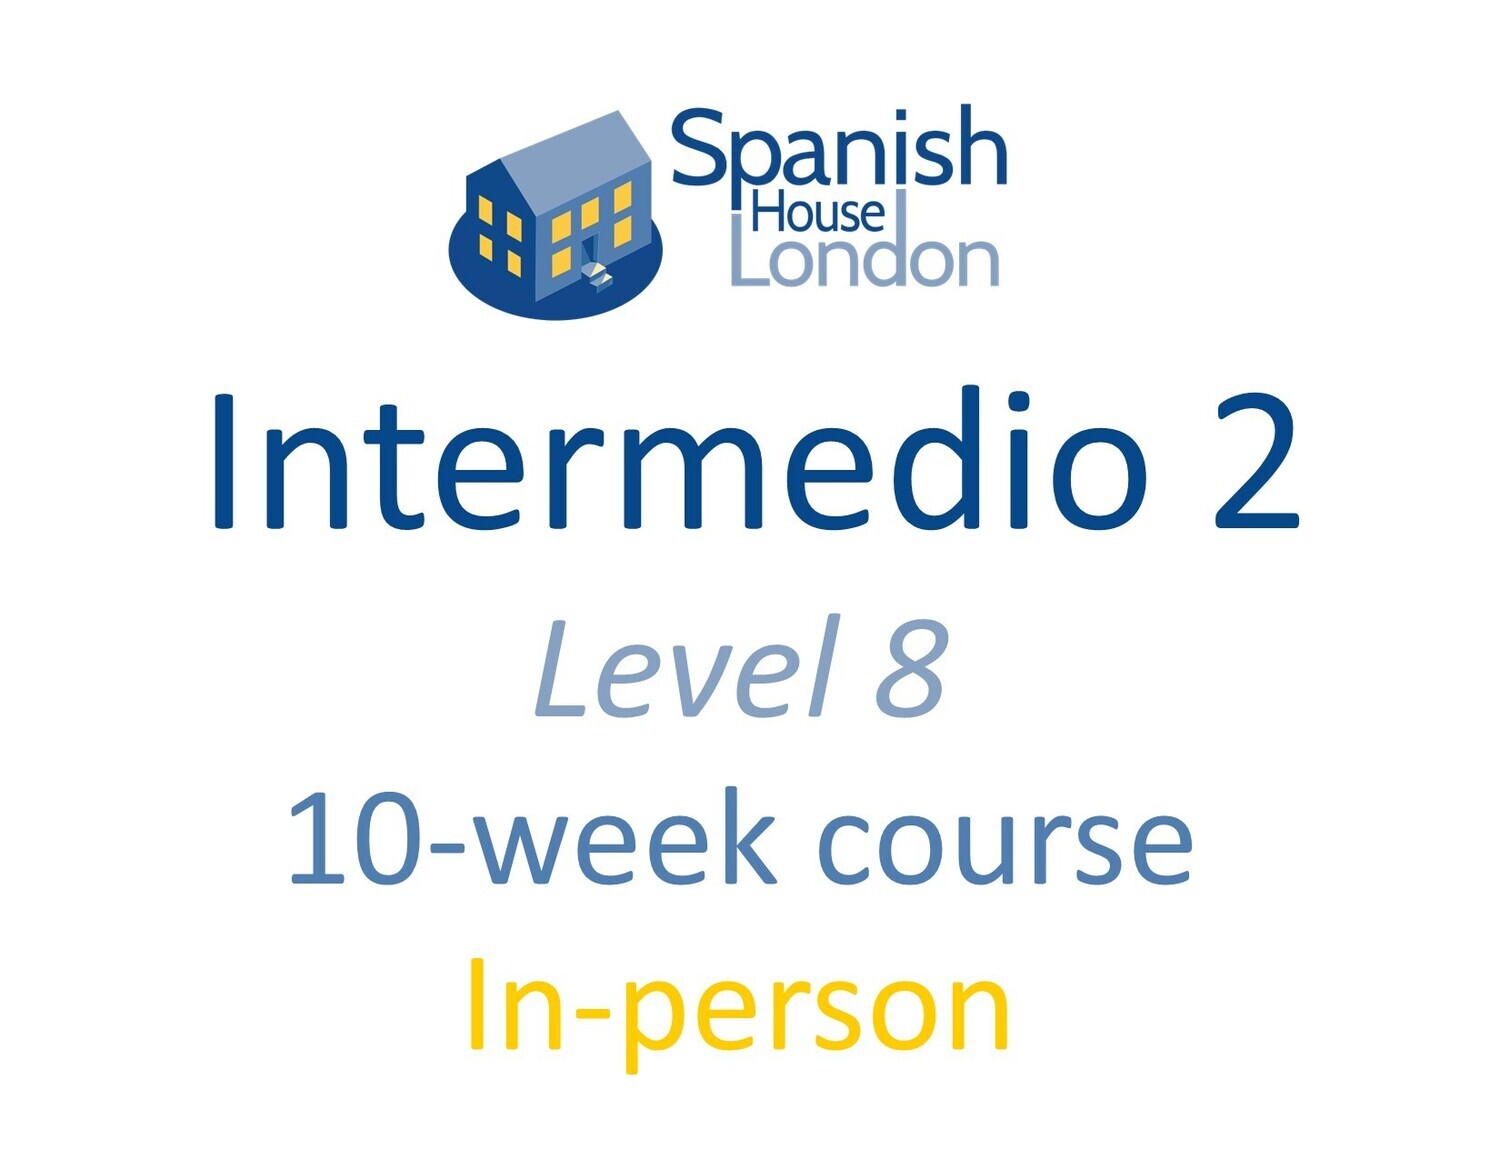 Intermedio 2 Course starting on 8th February at 7.30pm in Euston / King's Cross